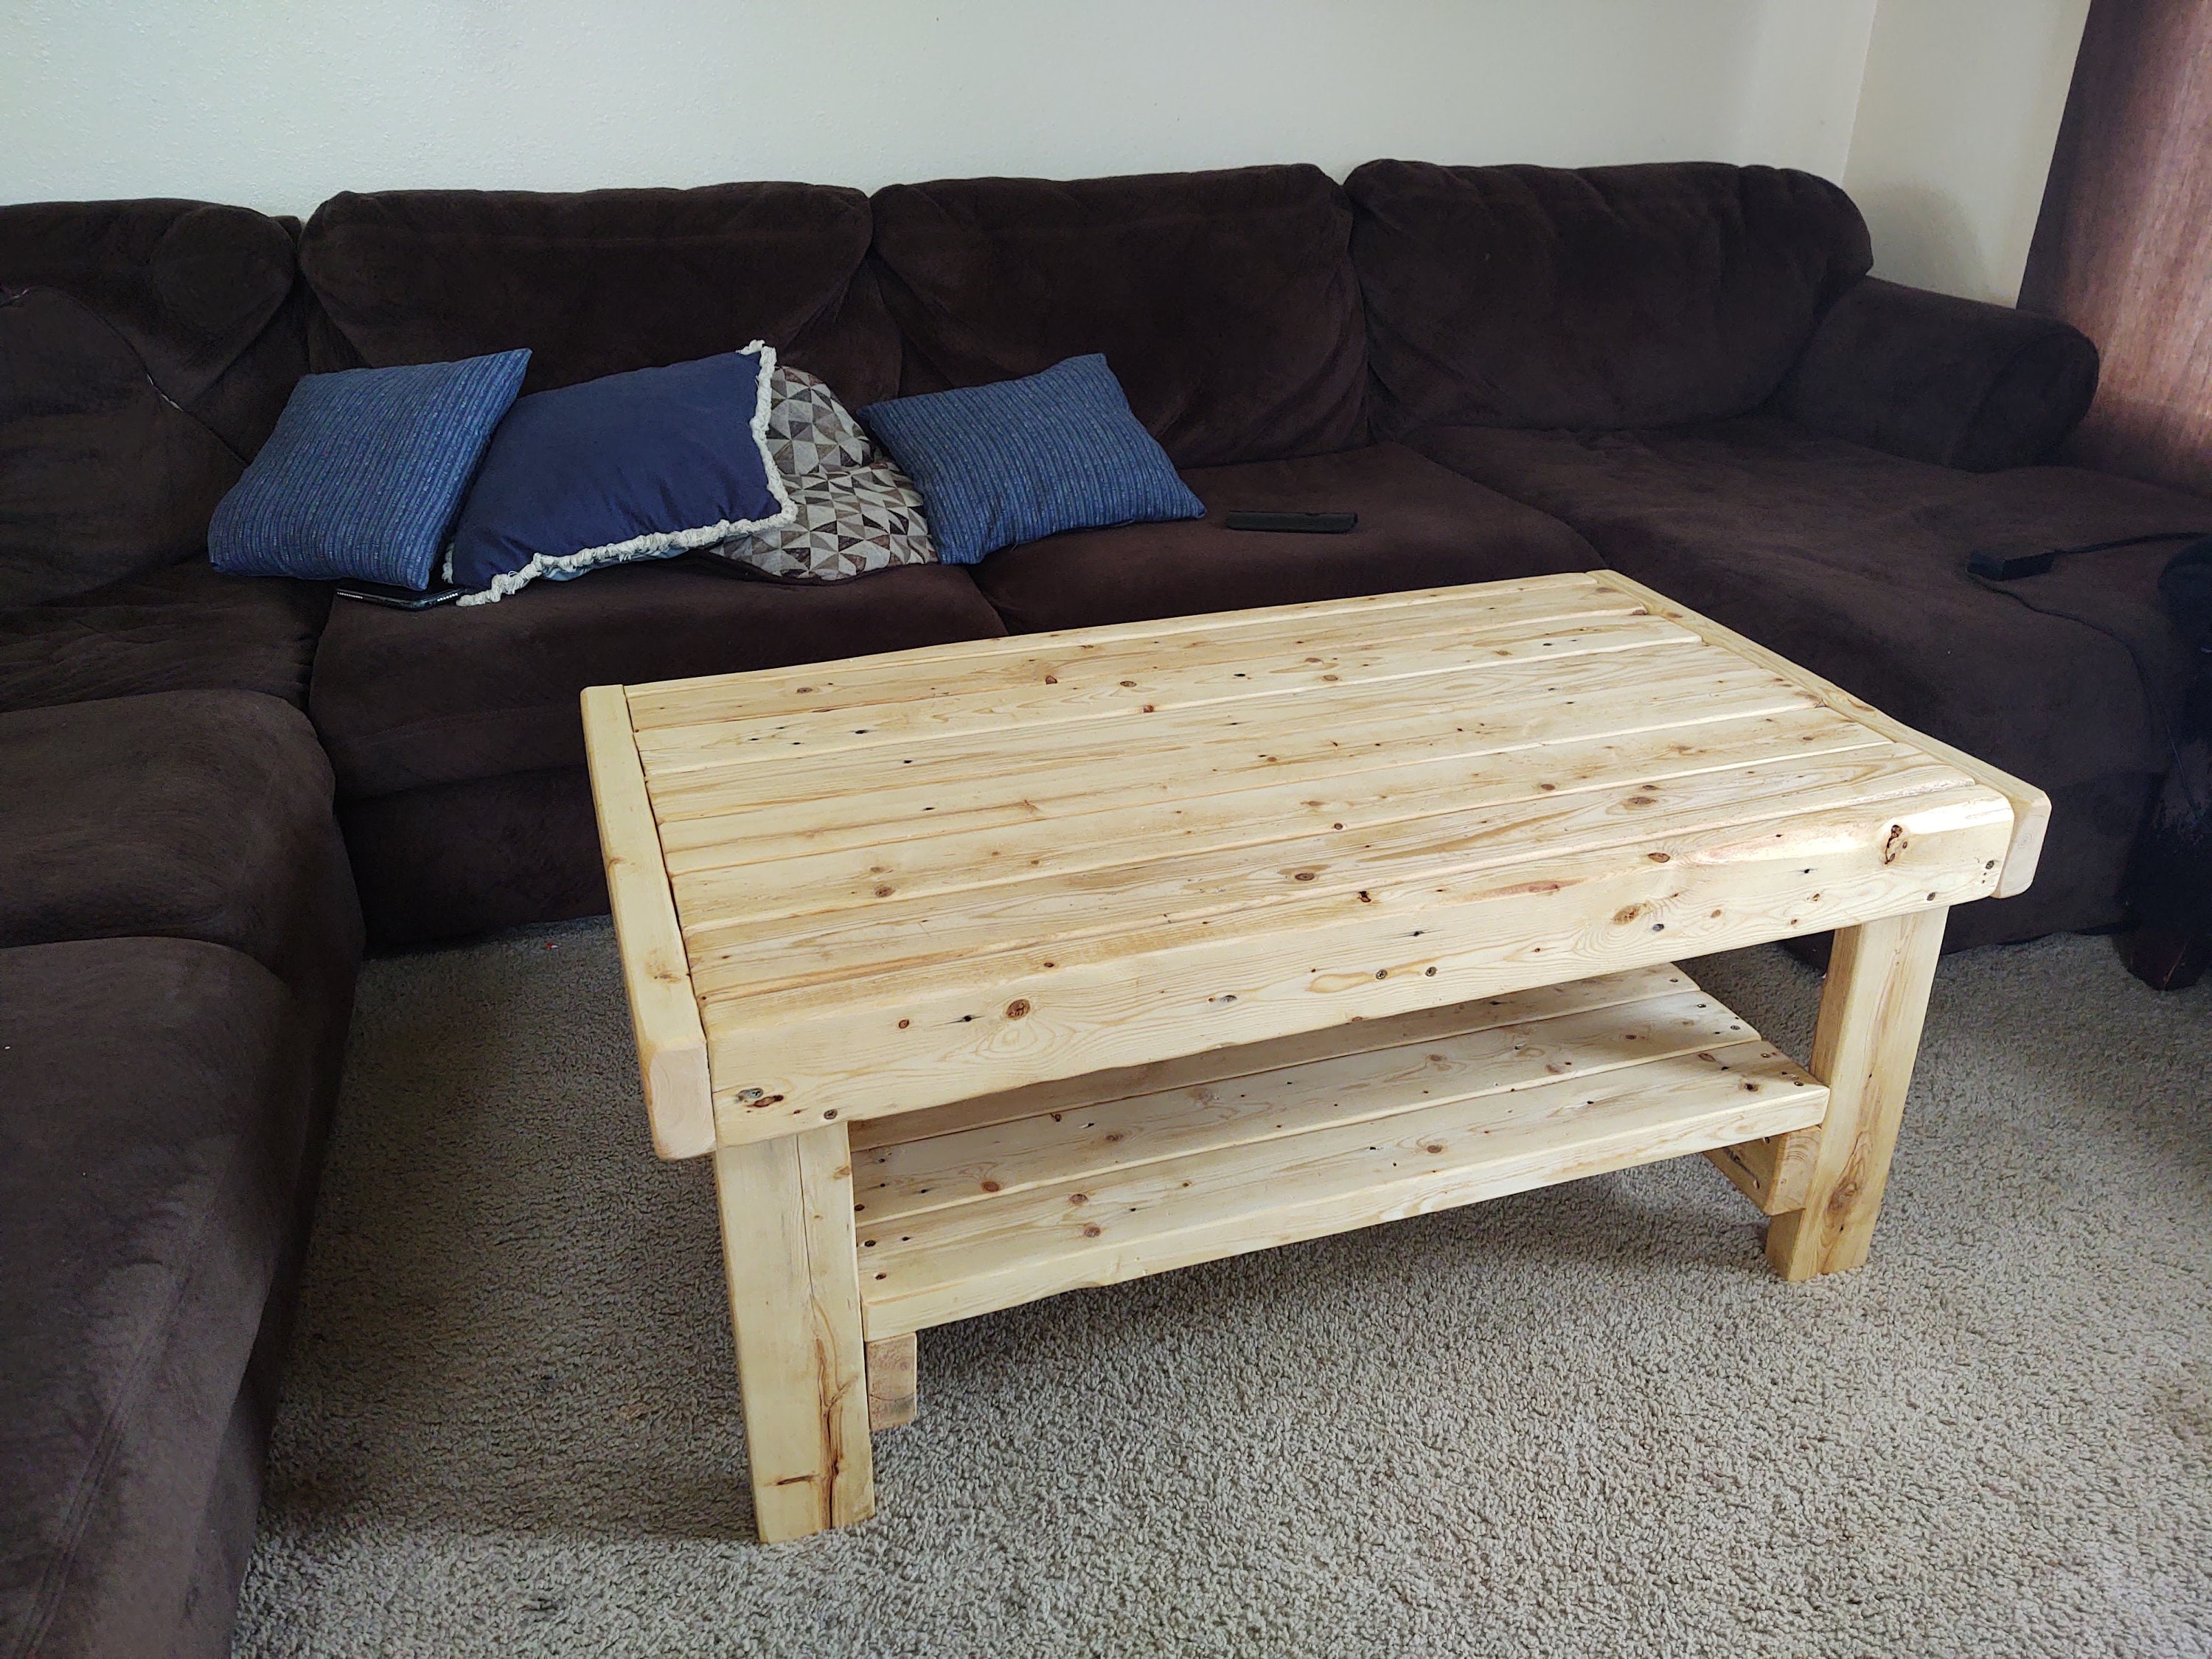 How To: Make A 2×4 Wooden Coffee Table - ManMadeDIY